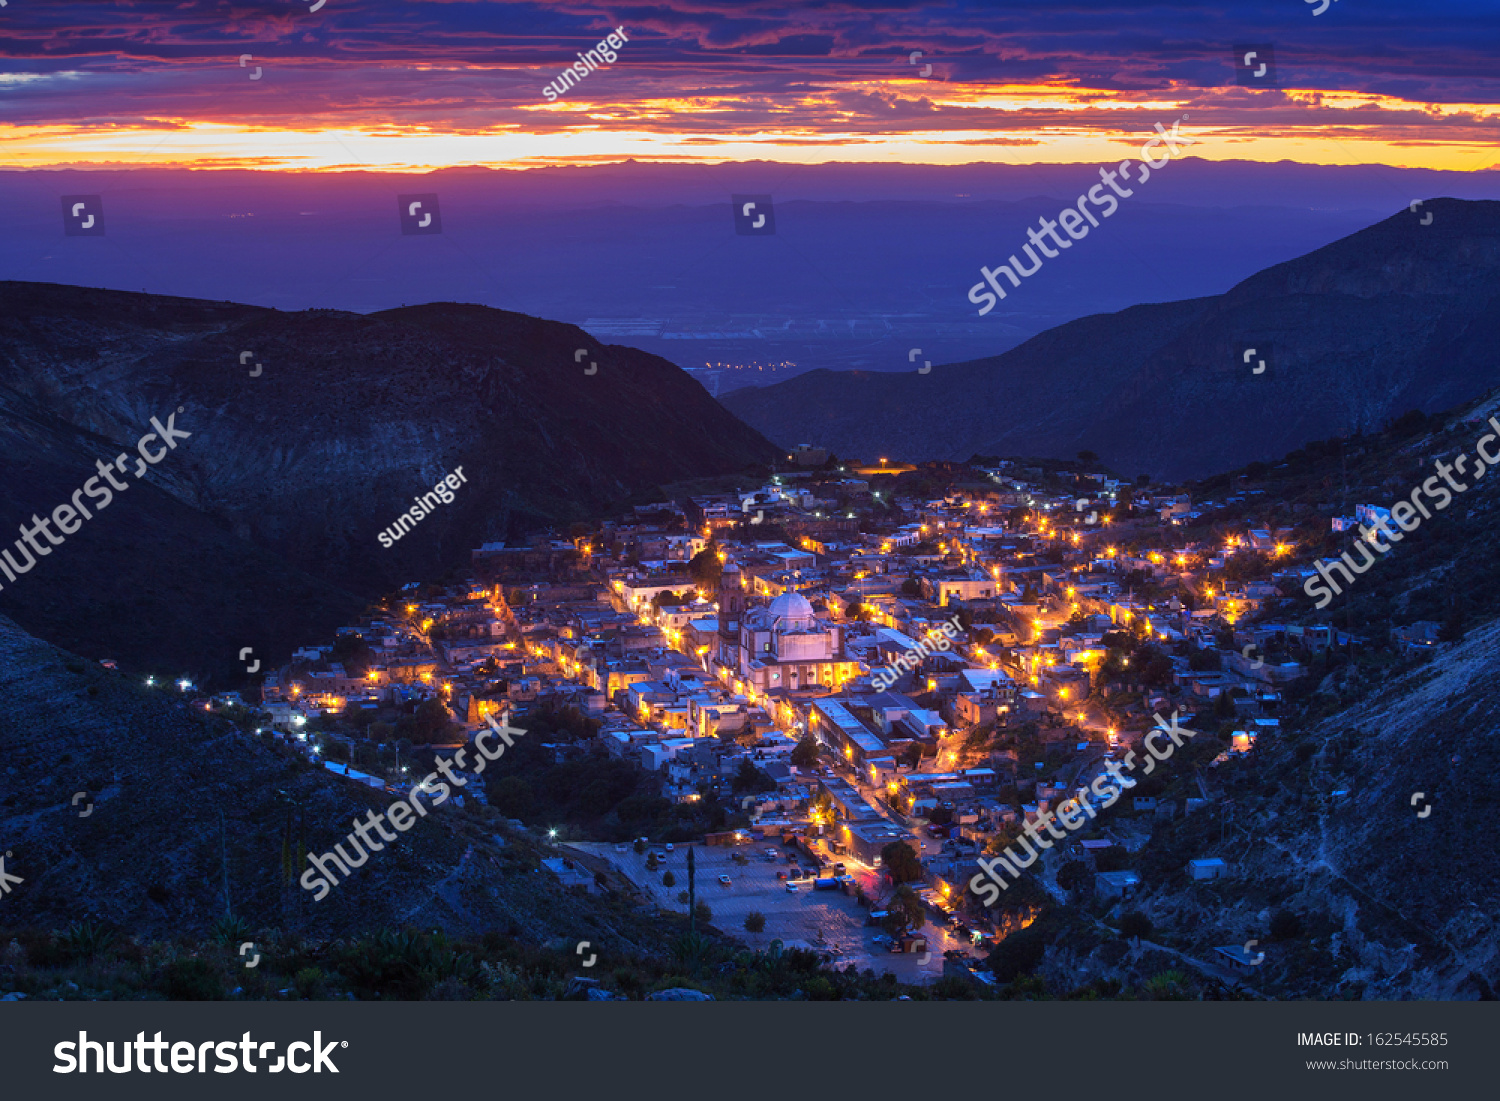 Real de Catorce - one of the magic towns in Mexico #162545585